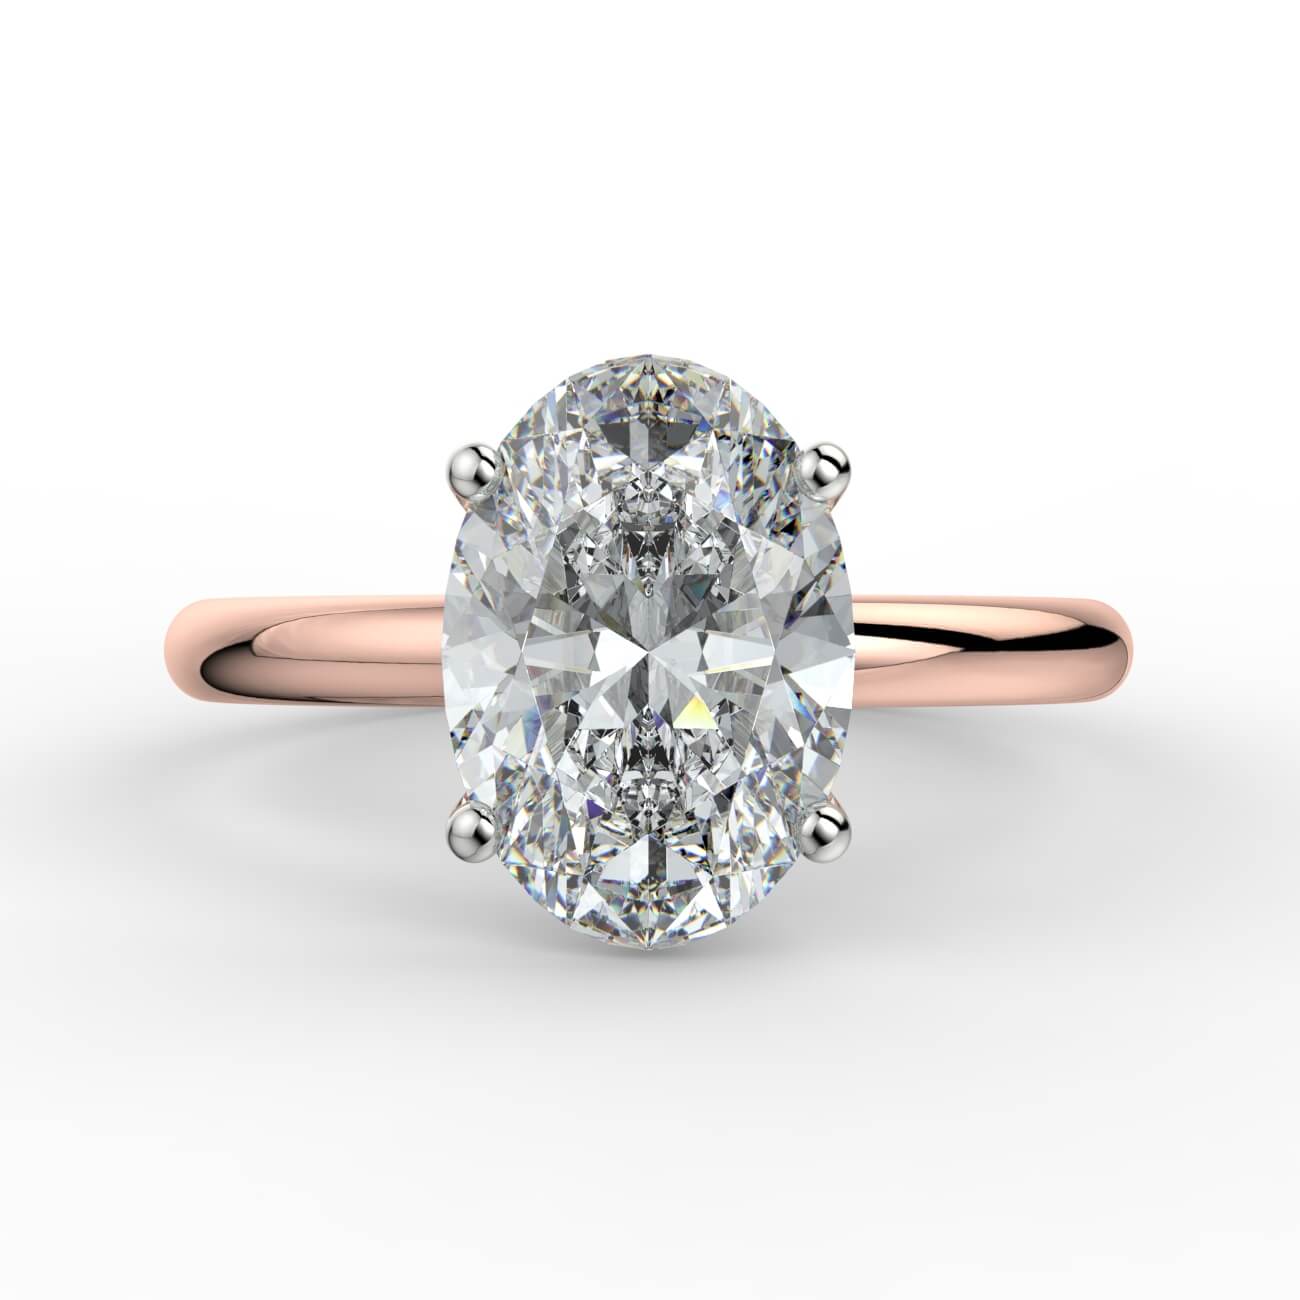 Solitaire oval diamond engagement ring in rose and white gold – Australian Diamond Network